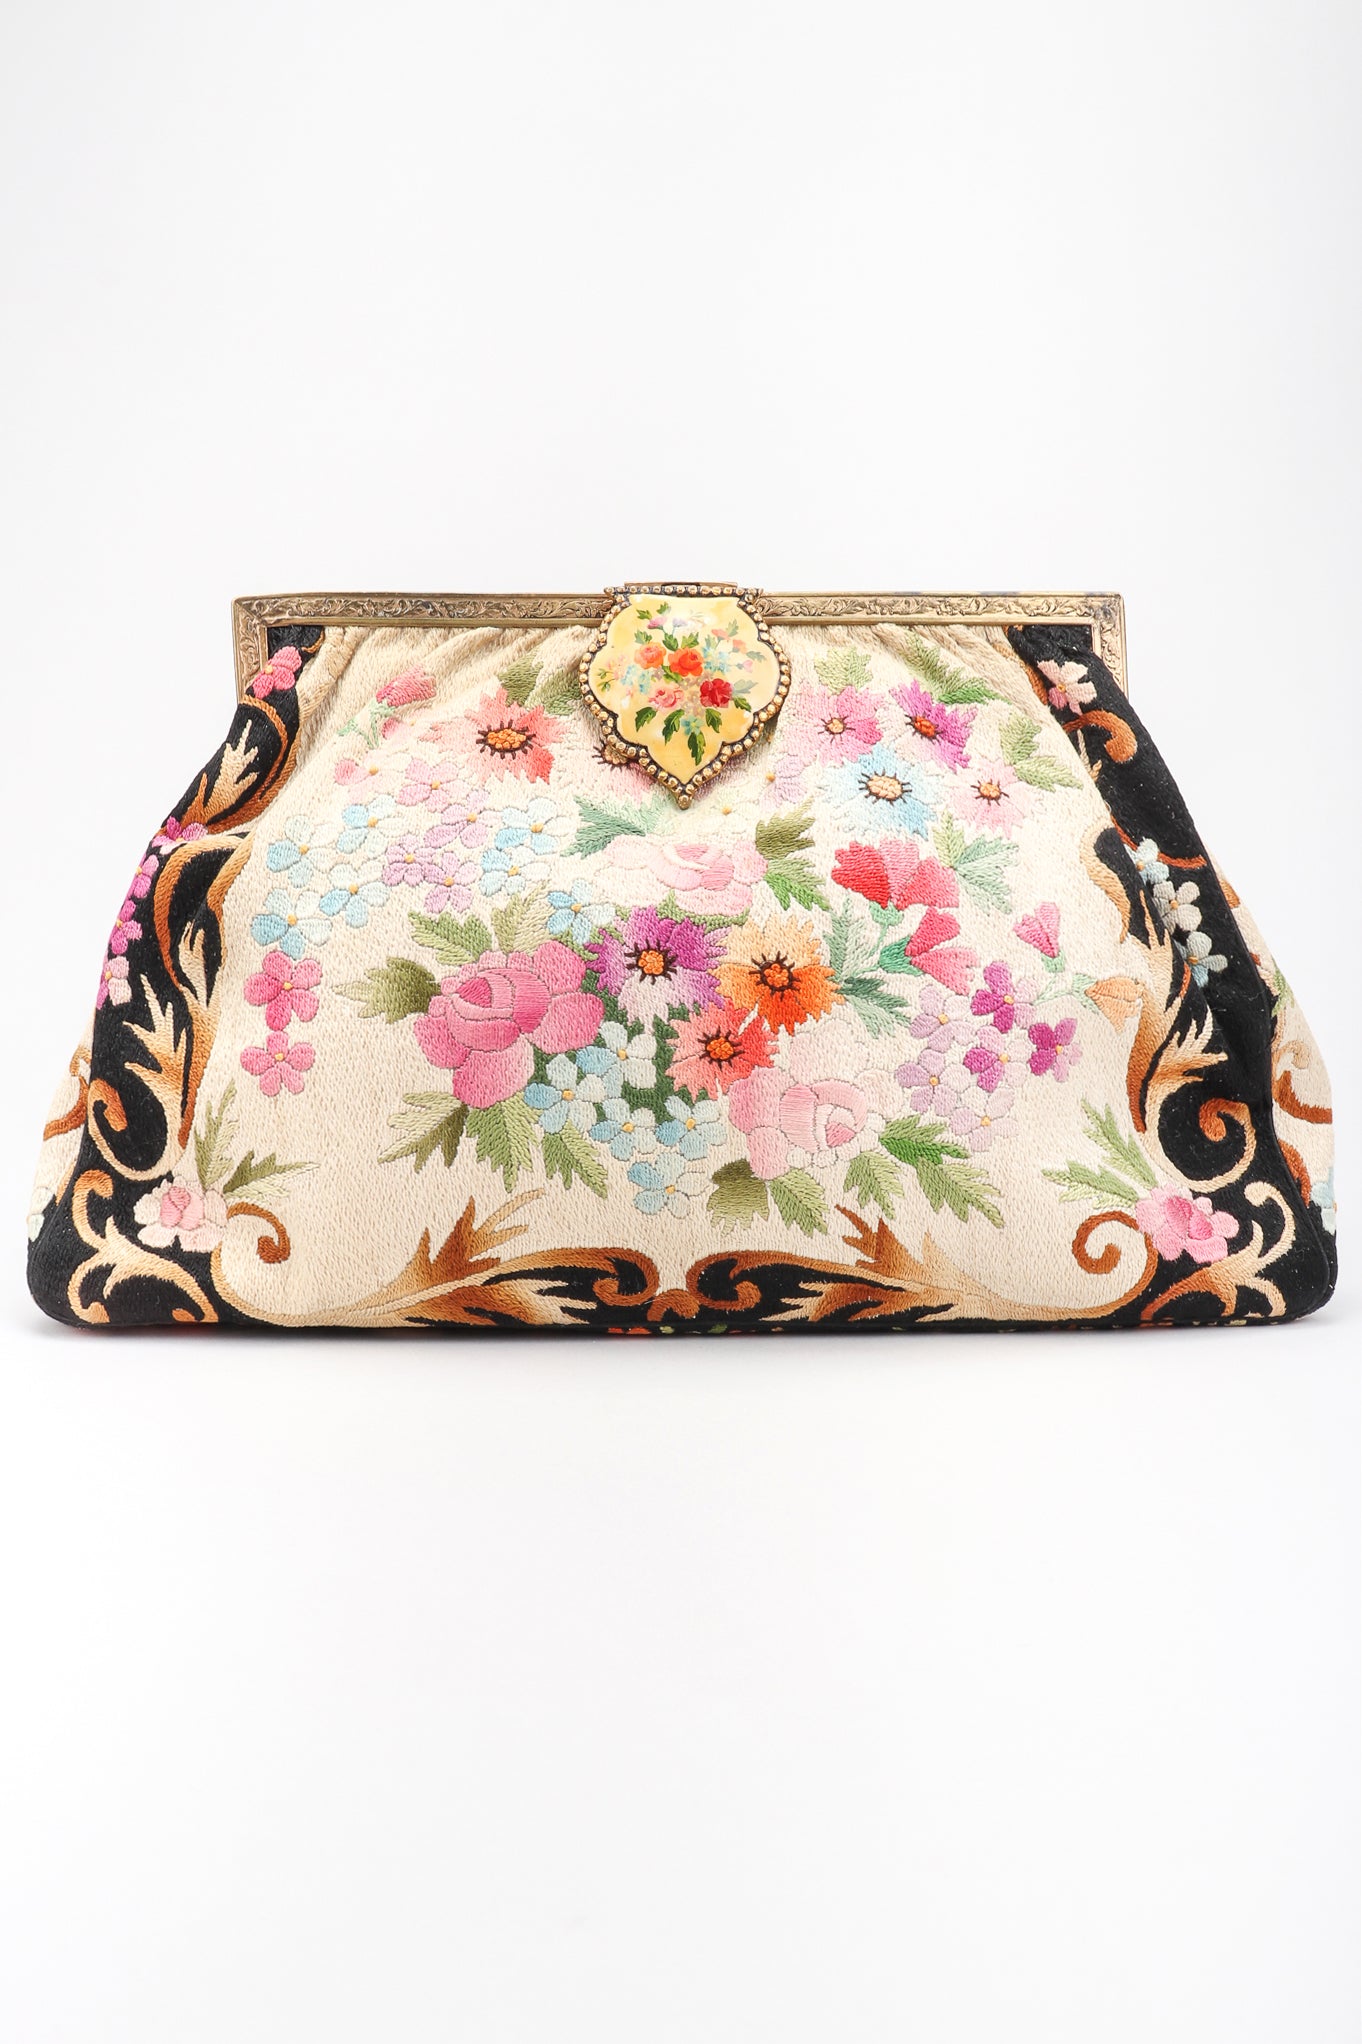 Antique/Vintage Petit Point Floral Tapestry Clutch Purse Made in Austria